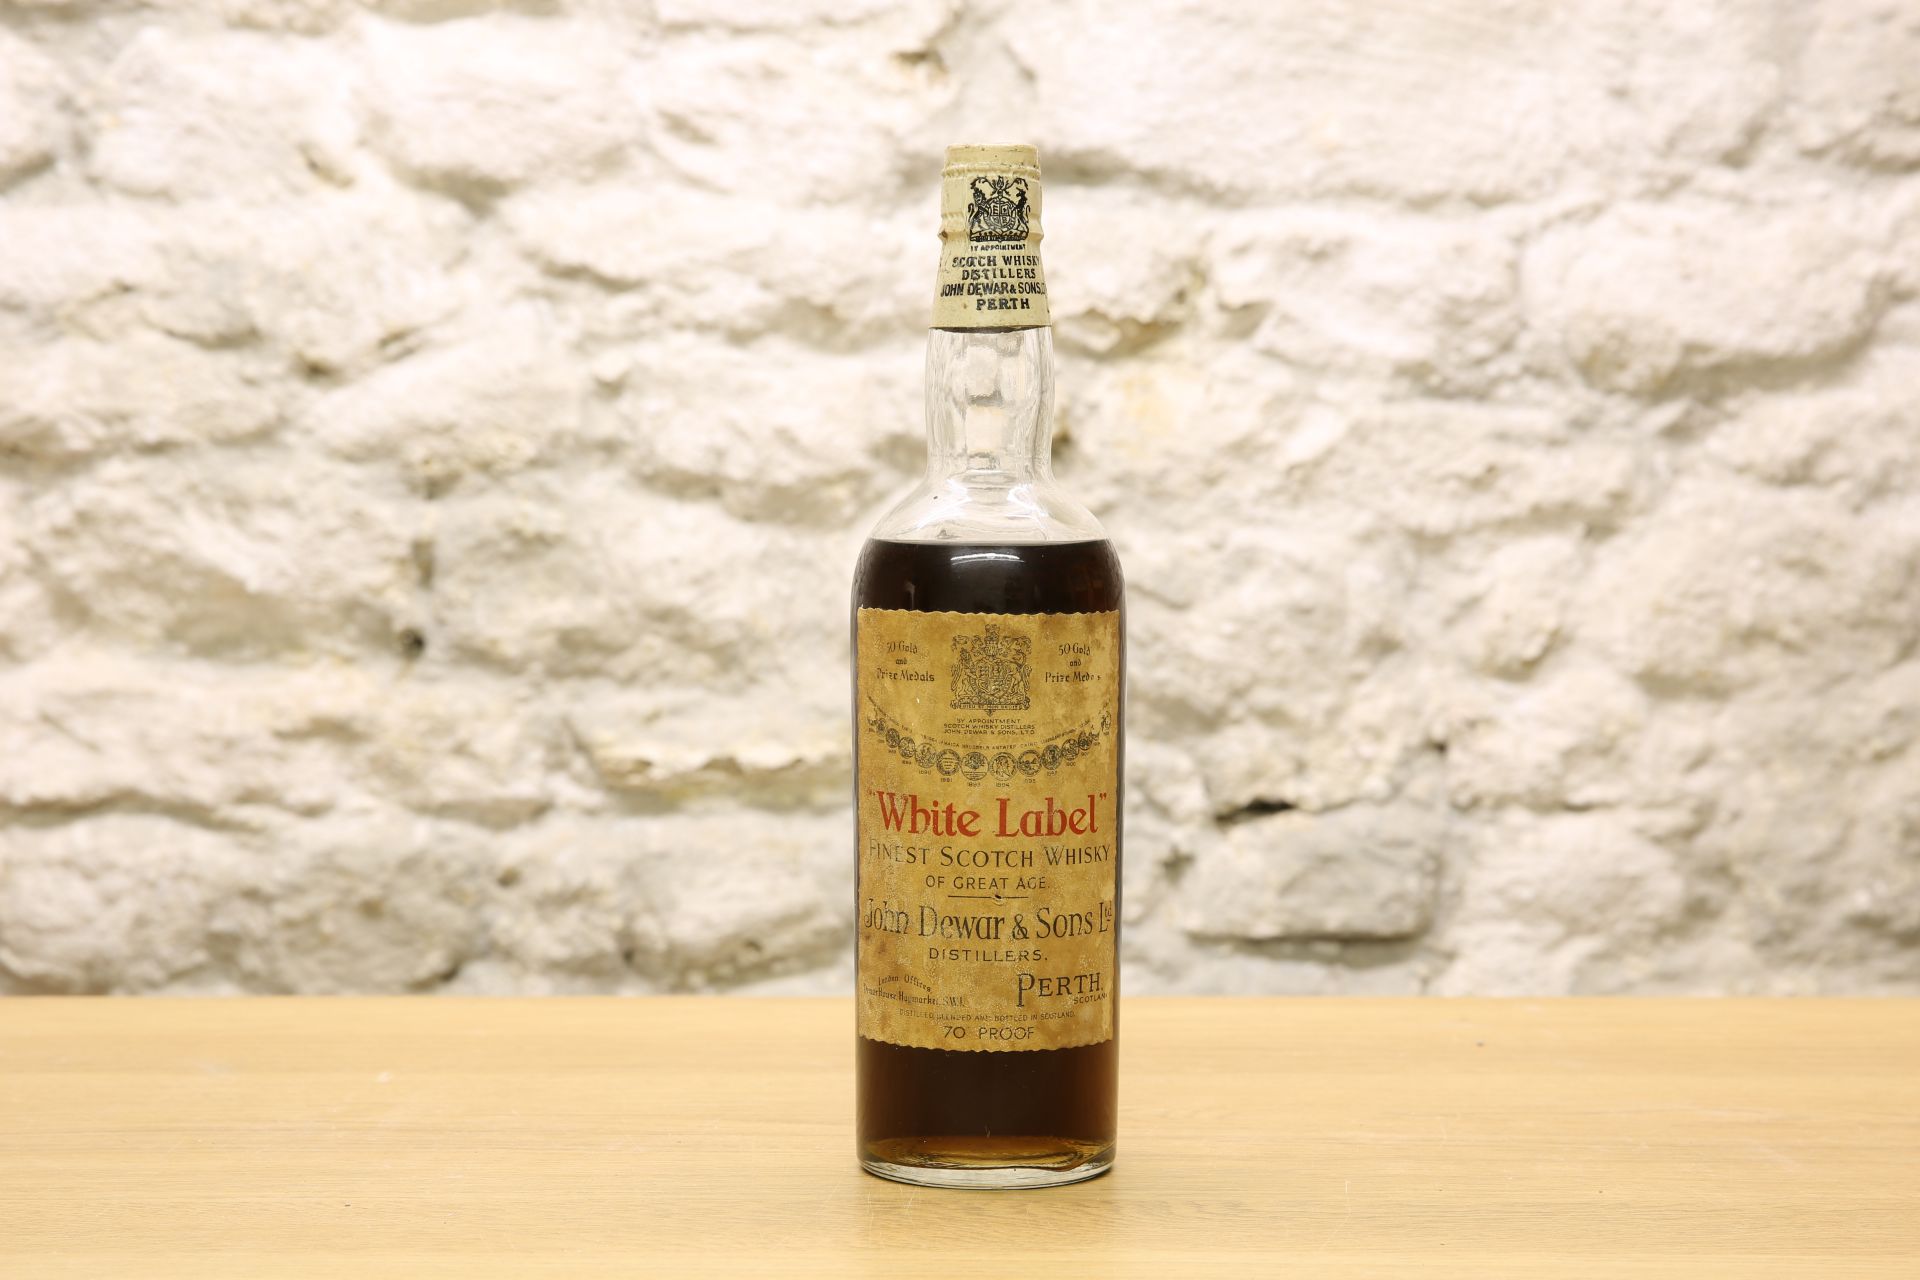 1 VERY RARE BOTTLE DEWARS FINEST SCOTCH WHISKY “WHITE LABEL” ‘OF GREAT AGE’ WITH SPRING CAP